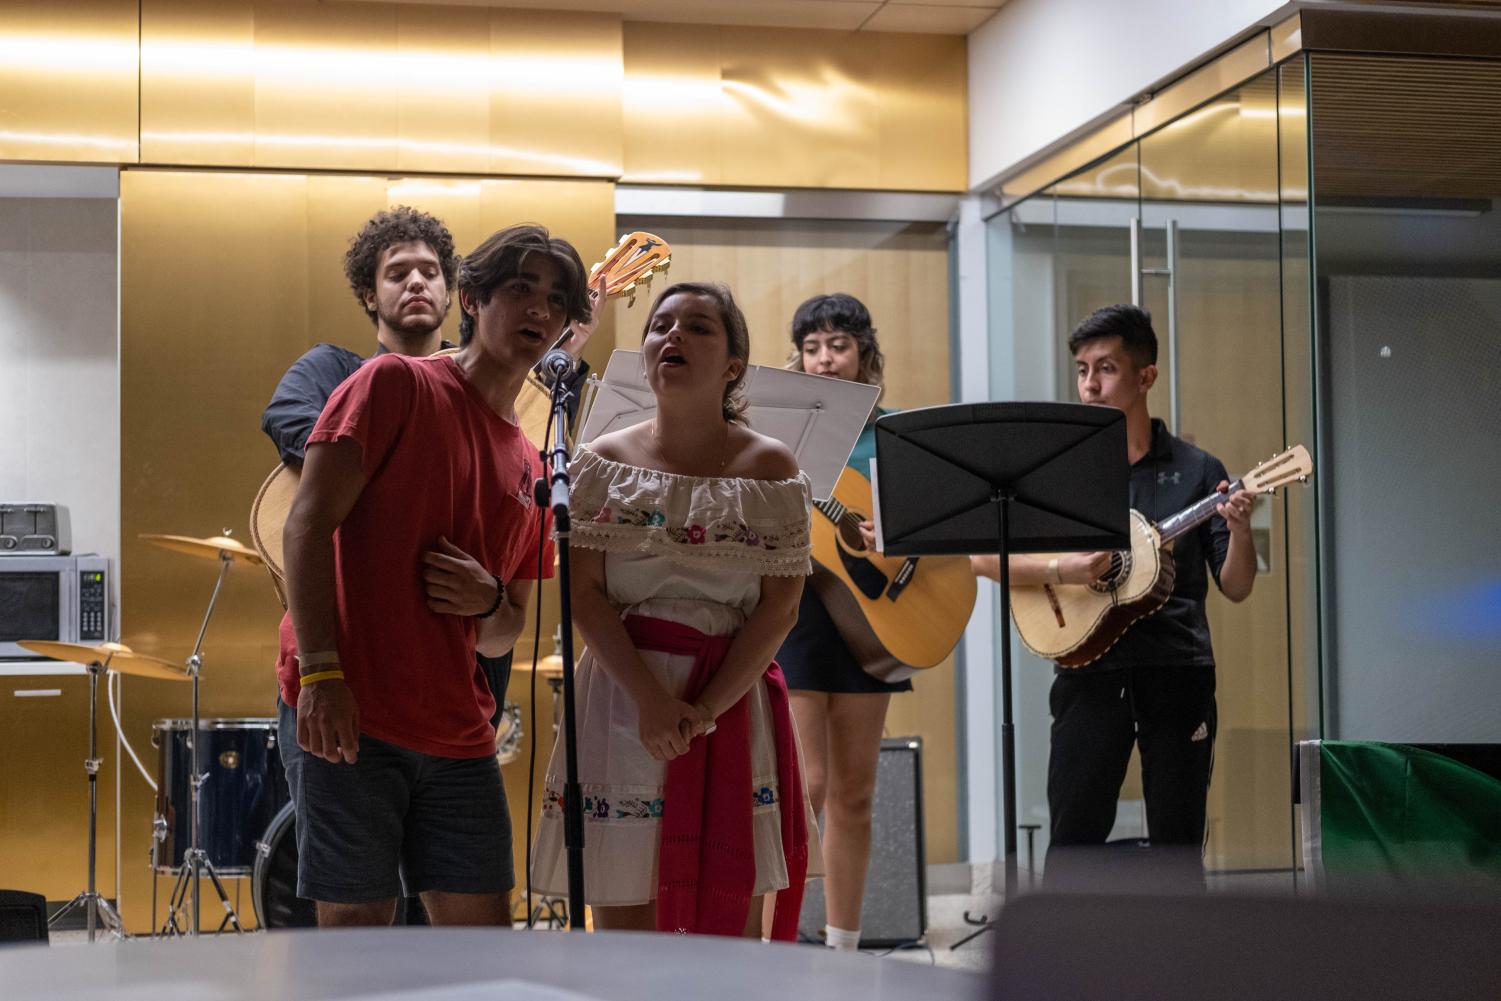 A student mariachi group performs. Two performers sing into a microphone as three others play instruments behind them.